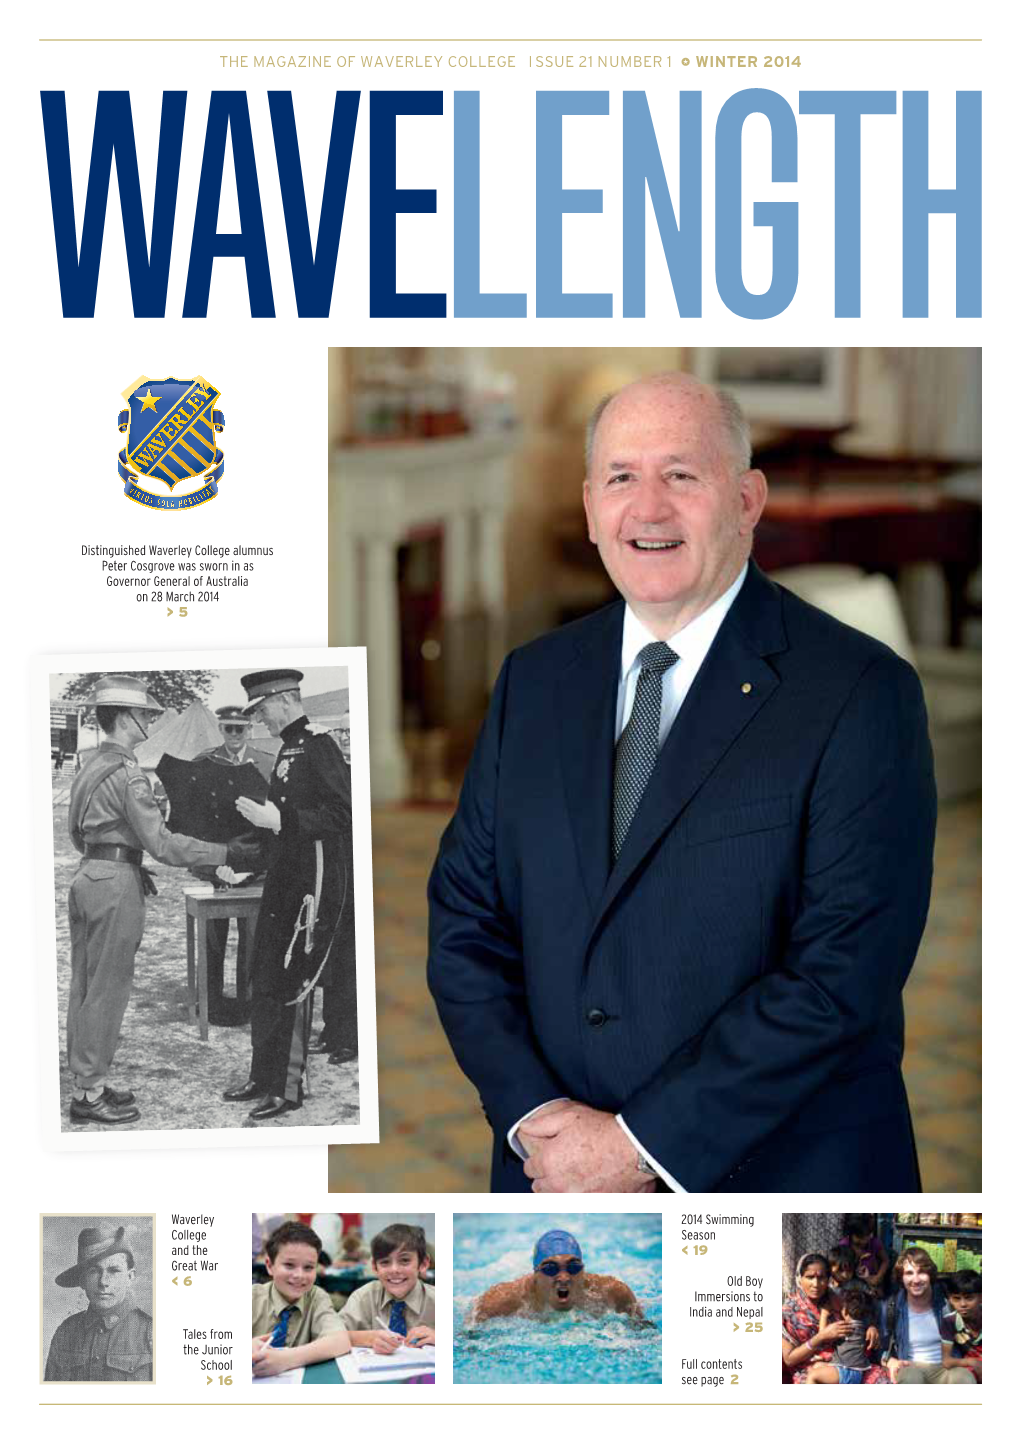 The Magazine of Waverley College Issue 21 Number 1